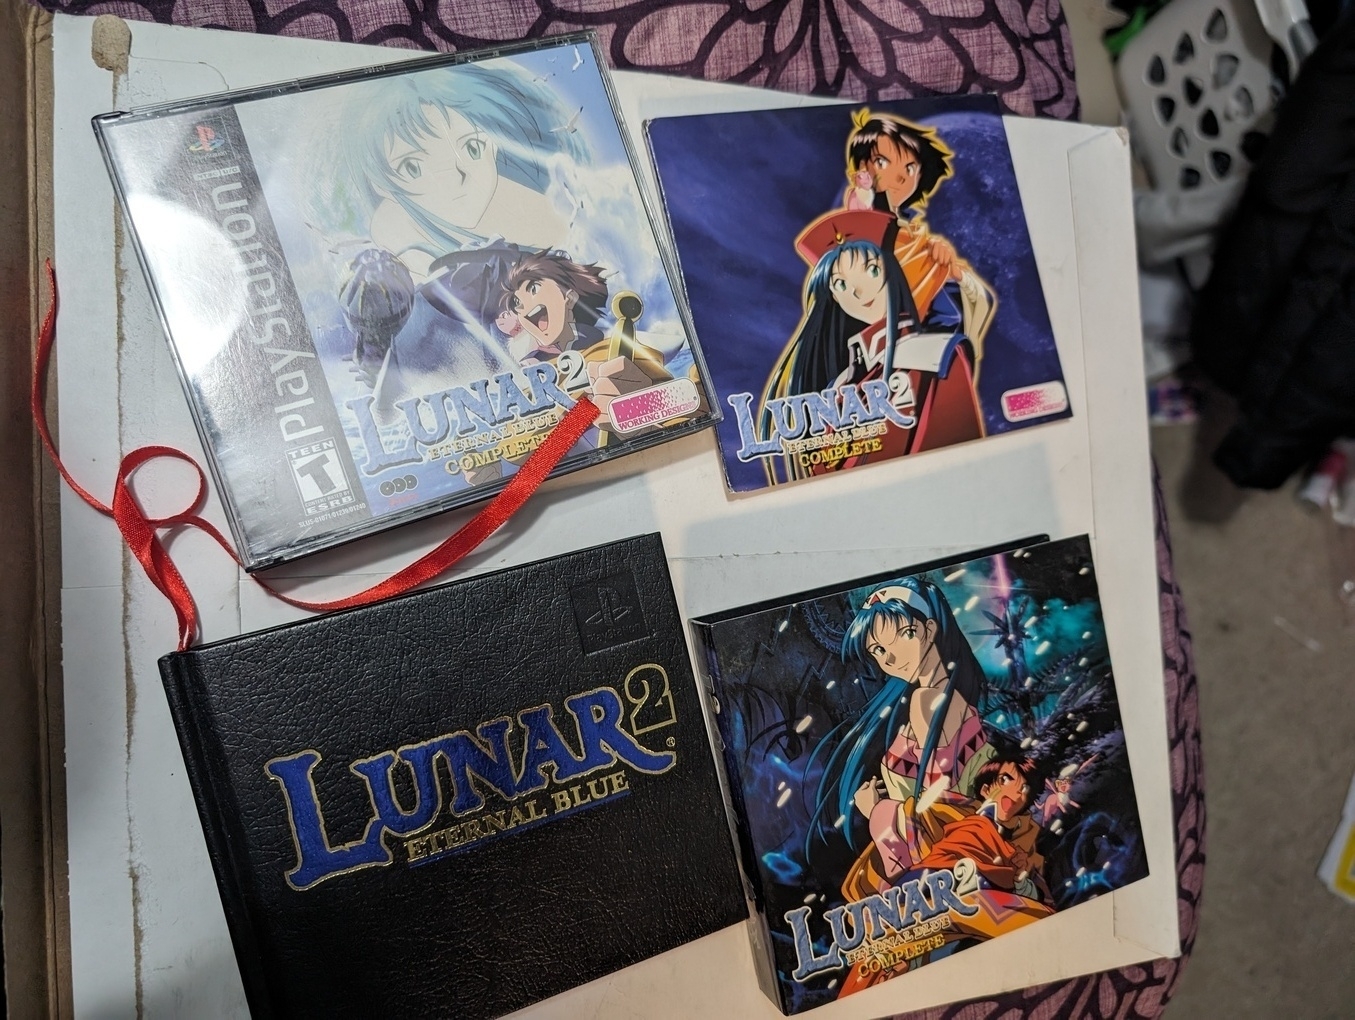 Photo of the PlayStation game Lunar 2 Eternal Blue Complete. The box is currently missing.